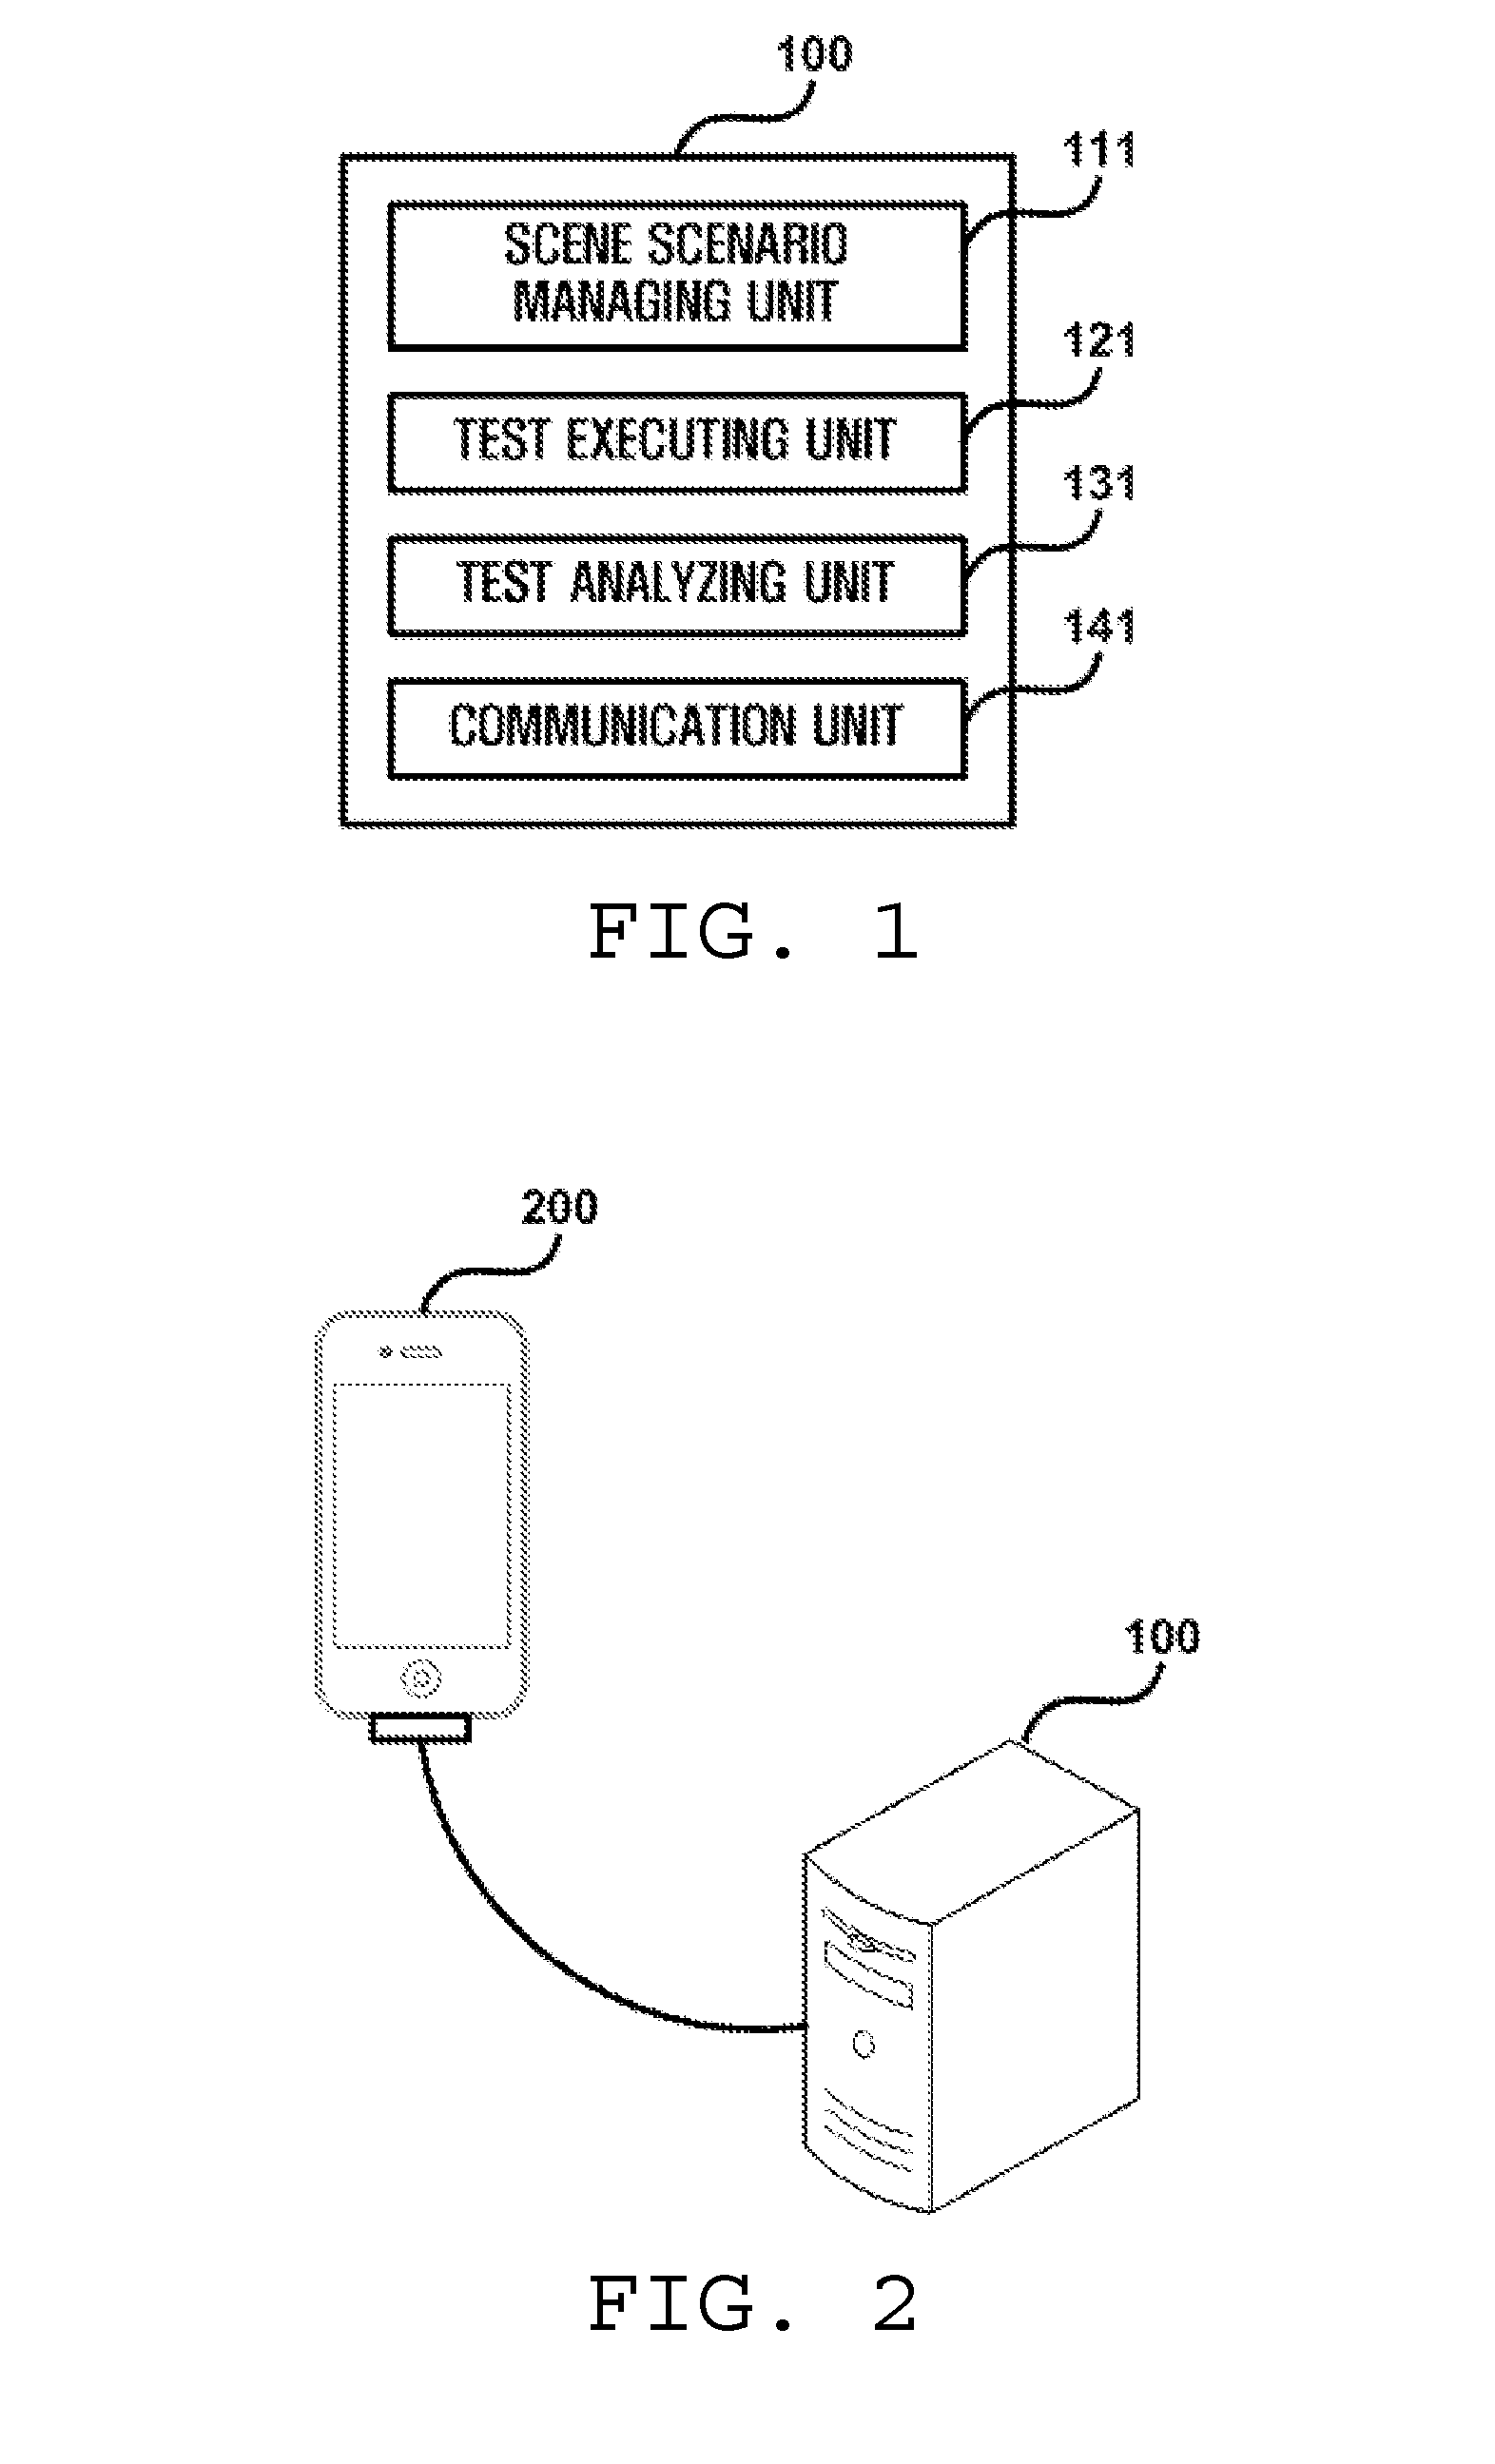 Method and system for automating a scene-based test